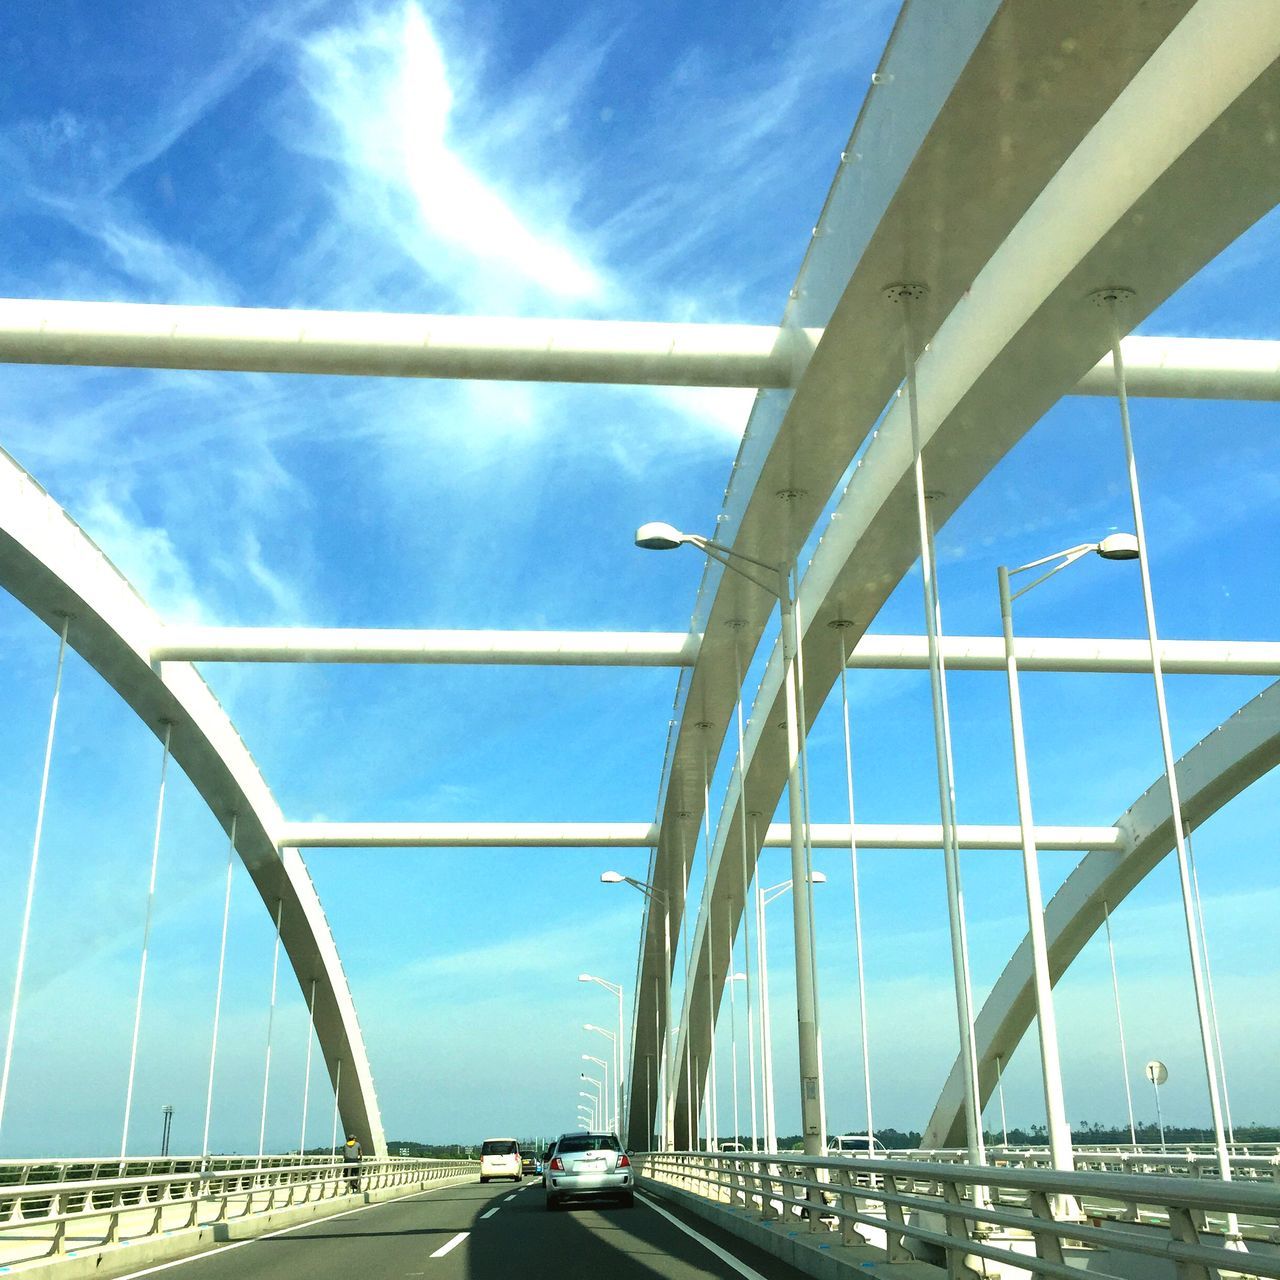 transportation, bridge - man made structure, connection, built structure, architecture, engineering, bridge, the way forward, sky, car, road, blue, low angle view, diminishing perspective, mode of transport, sunlight, land vehicle, suspension bridge, vanishing point, railing